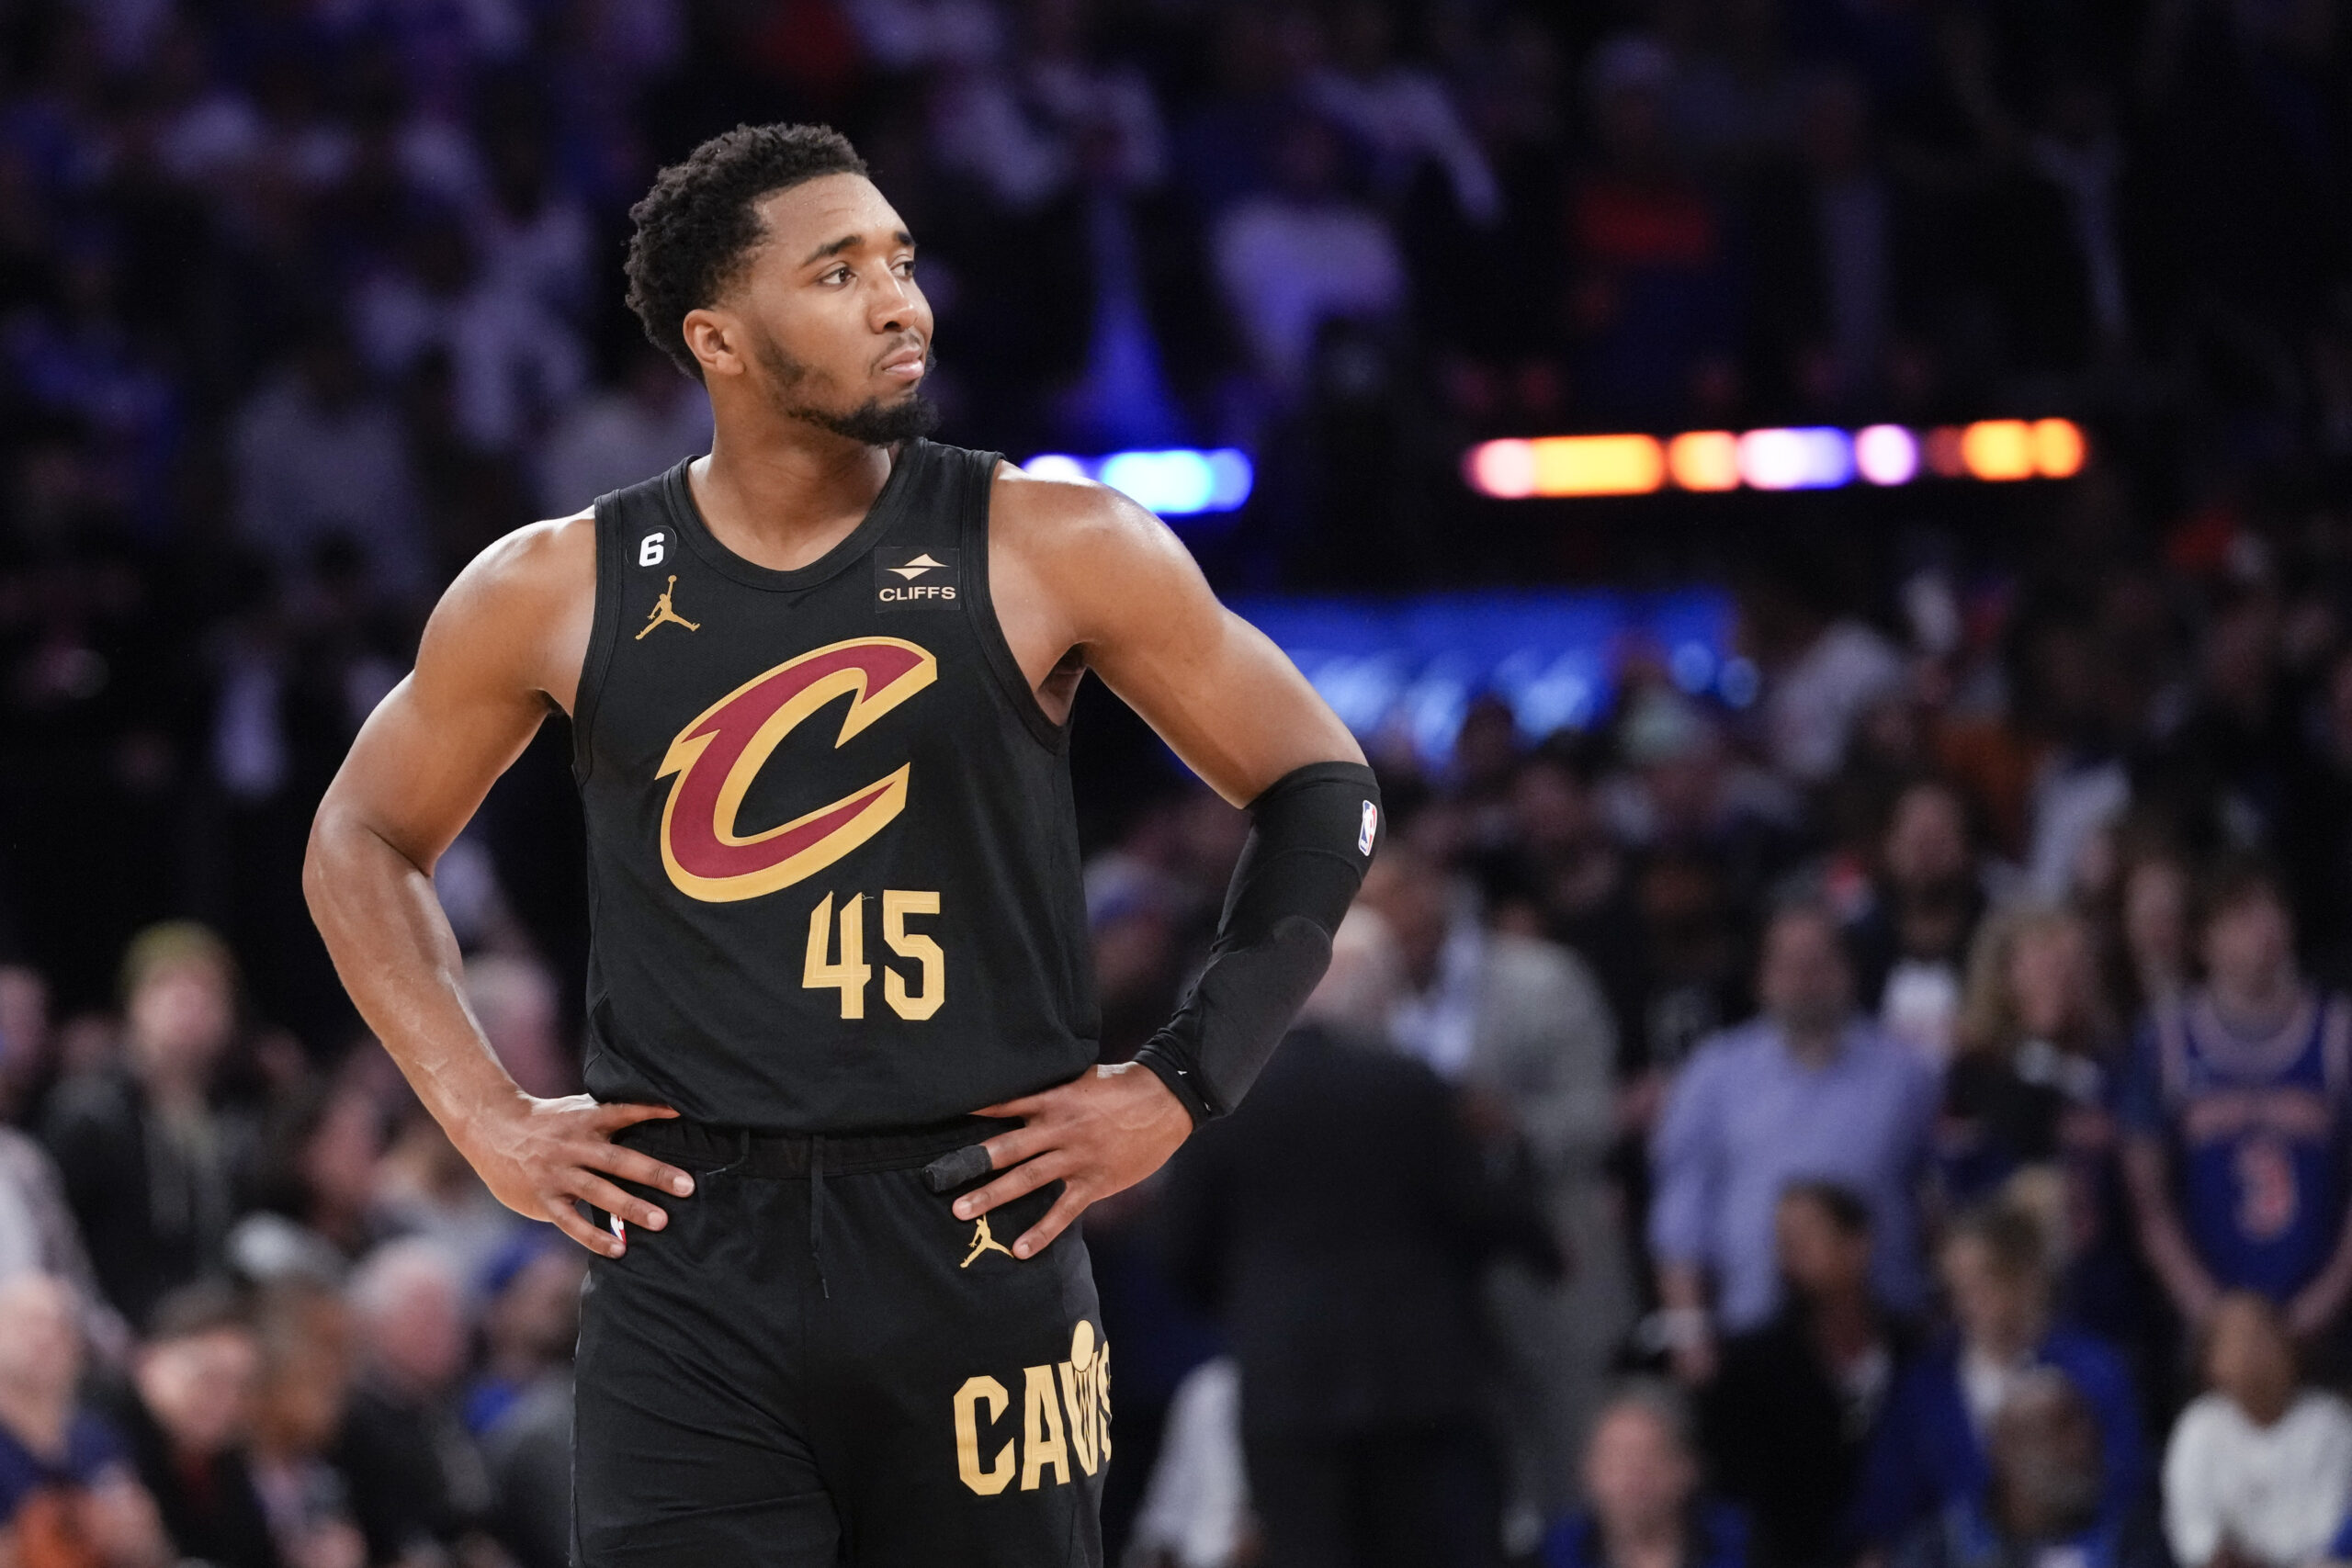 Donovan Mitchell, Cavaliers' Donovan Mitchell To The Nets Trade In Proposal